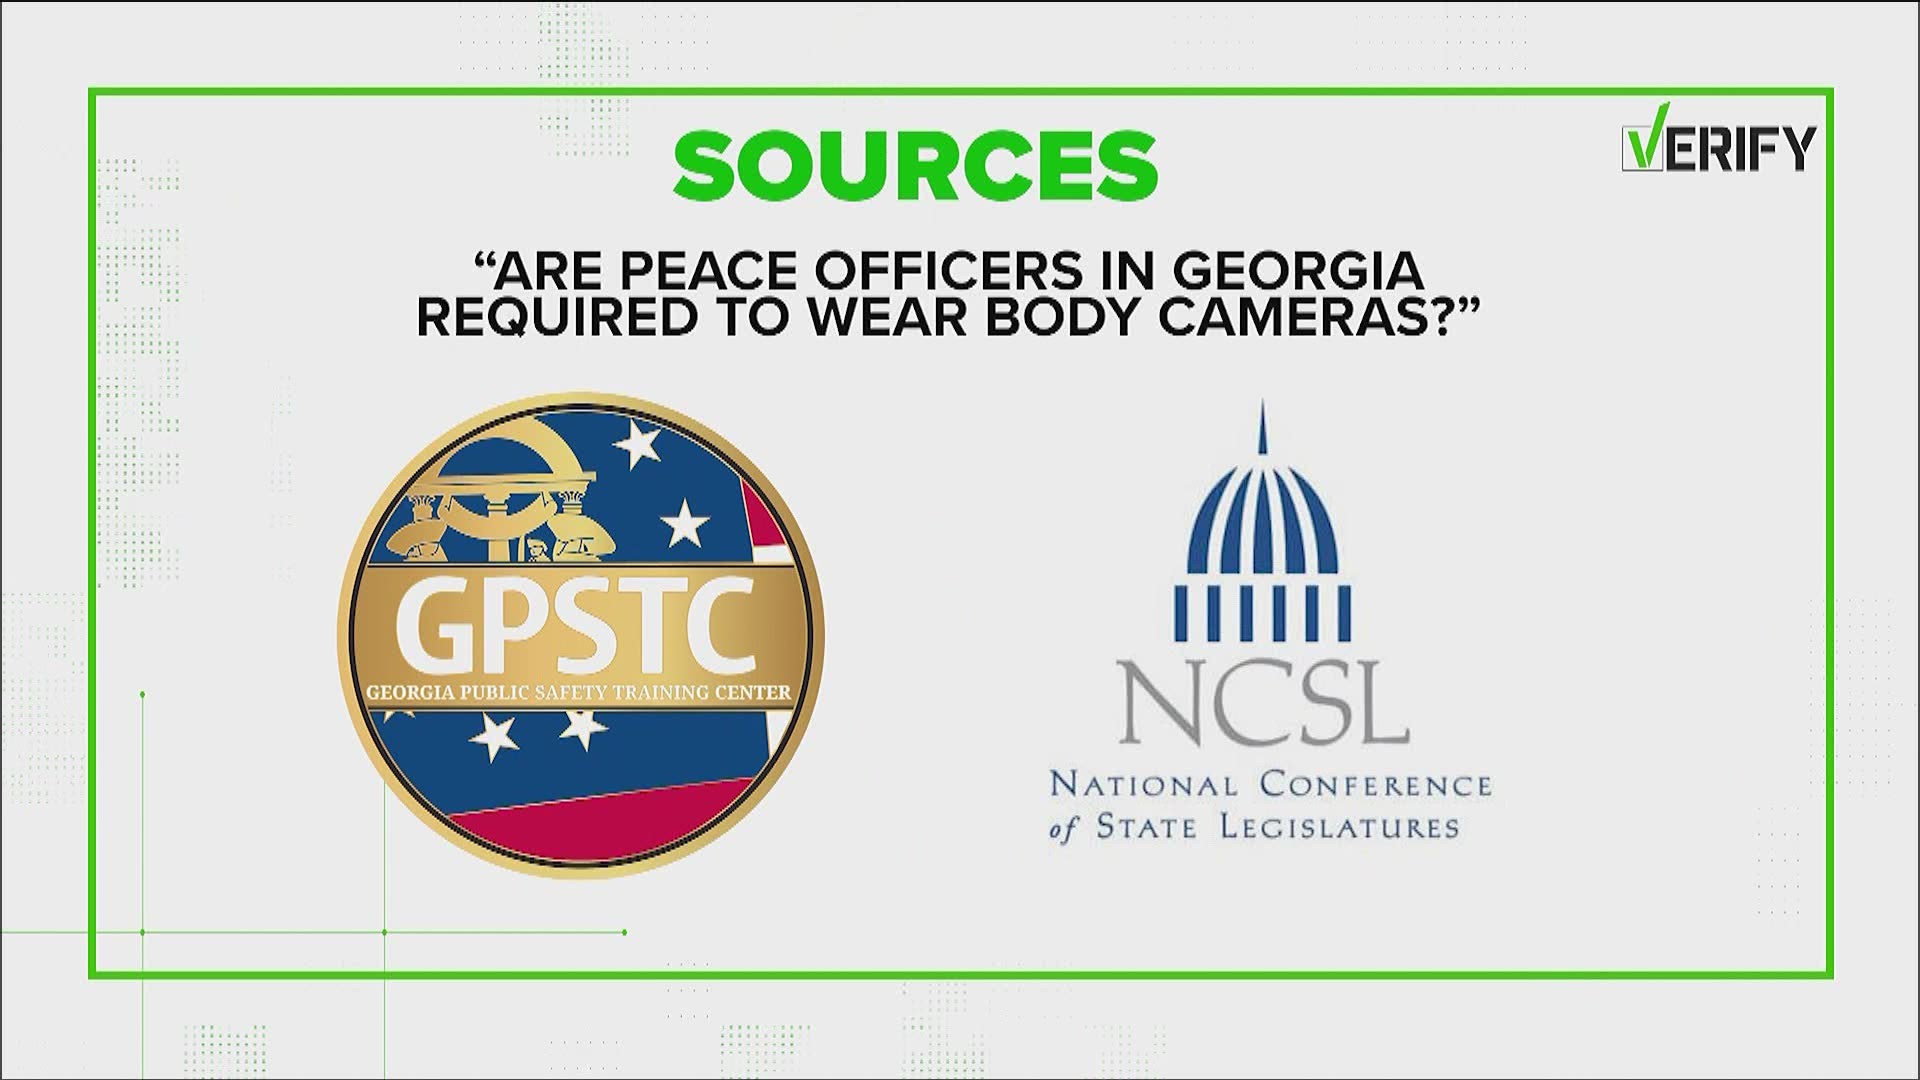 The VERIFY team investigated whether there is a state law requiring body cameras be worn by peace officers.